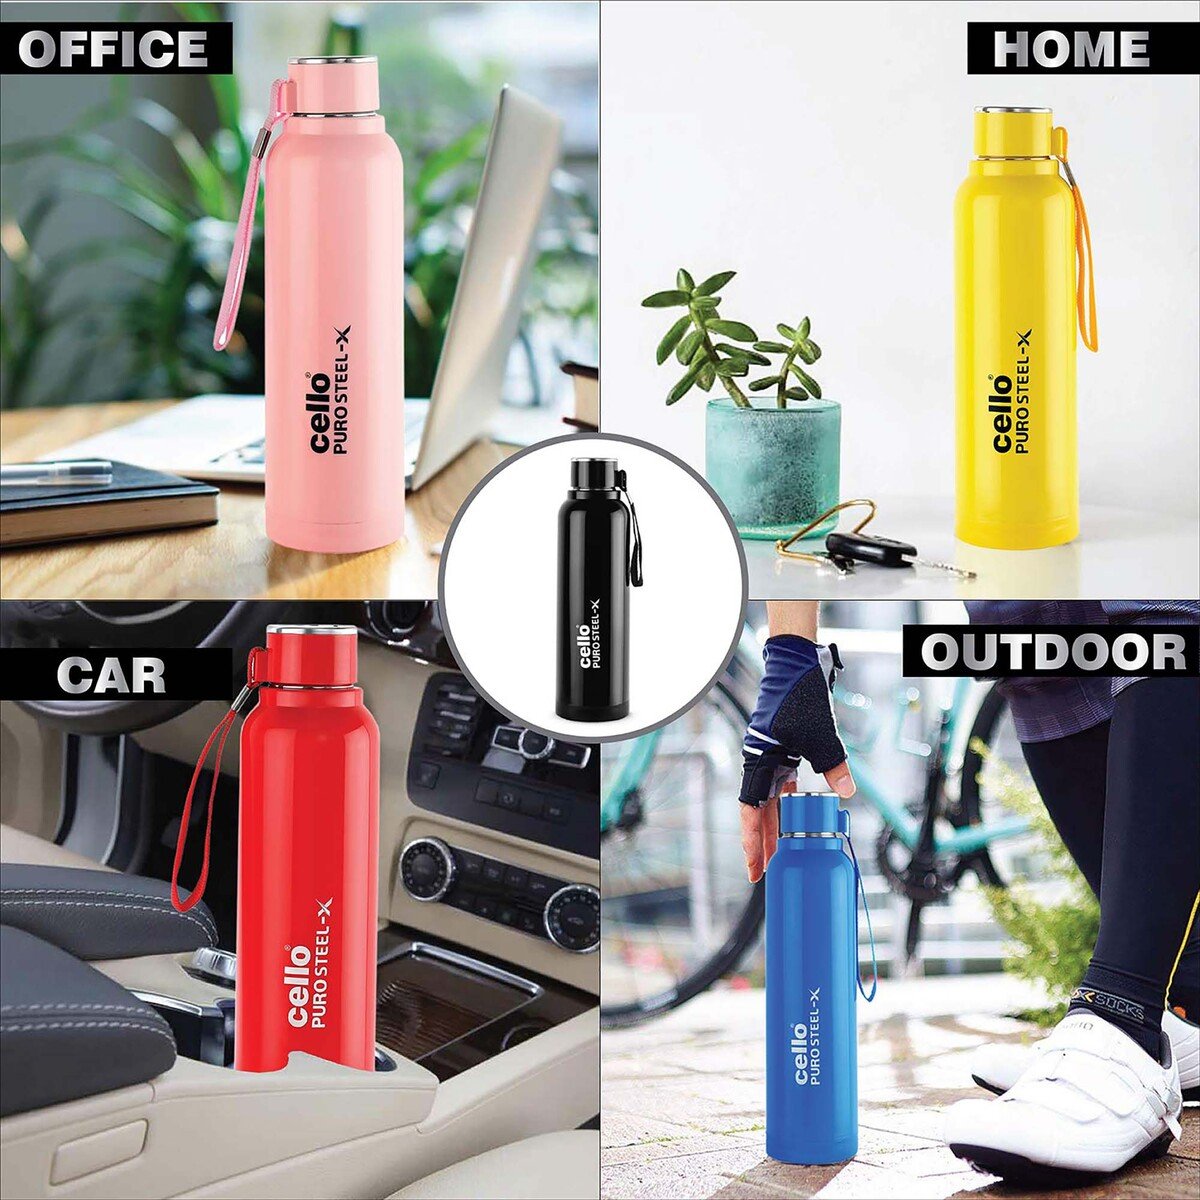 Cello Stainless Steel Water Bottle Puro X-Benz 600ml Assorted Per Pc